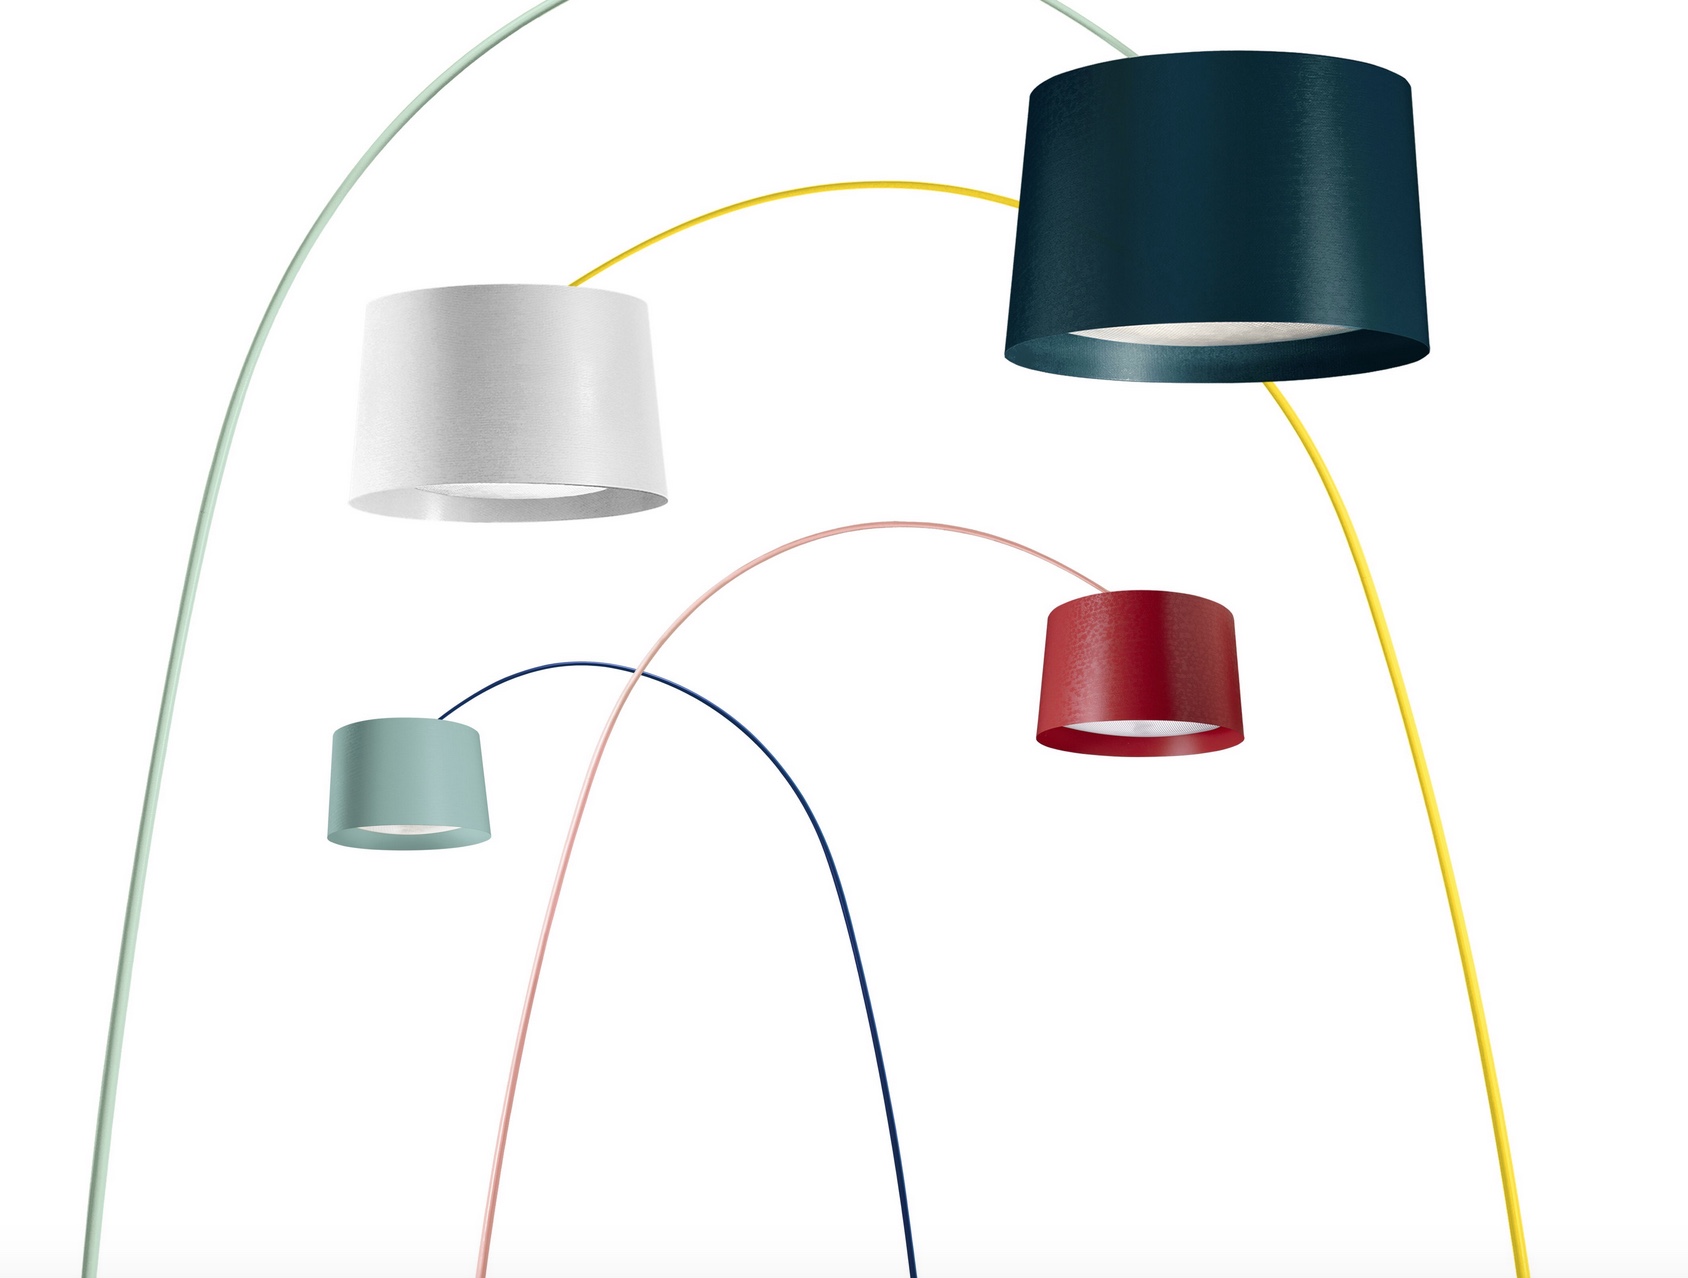 Foscarini Be/Colour collection Twiggy lamp in four different colors